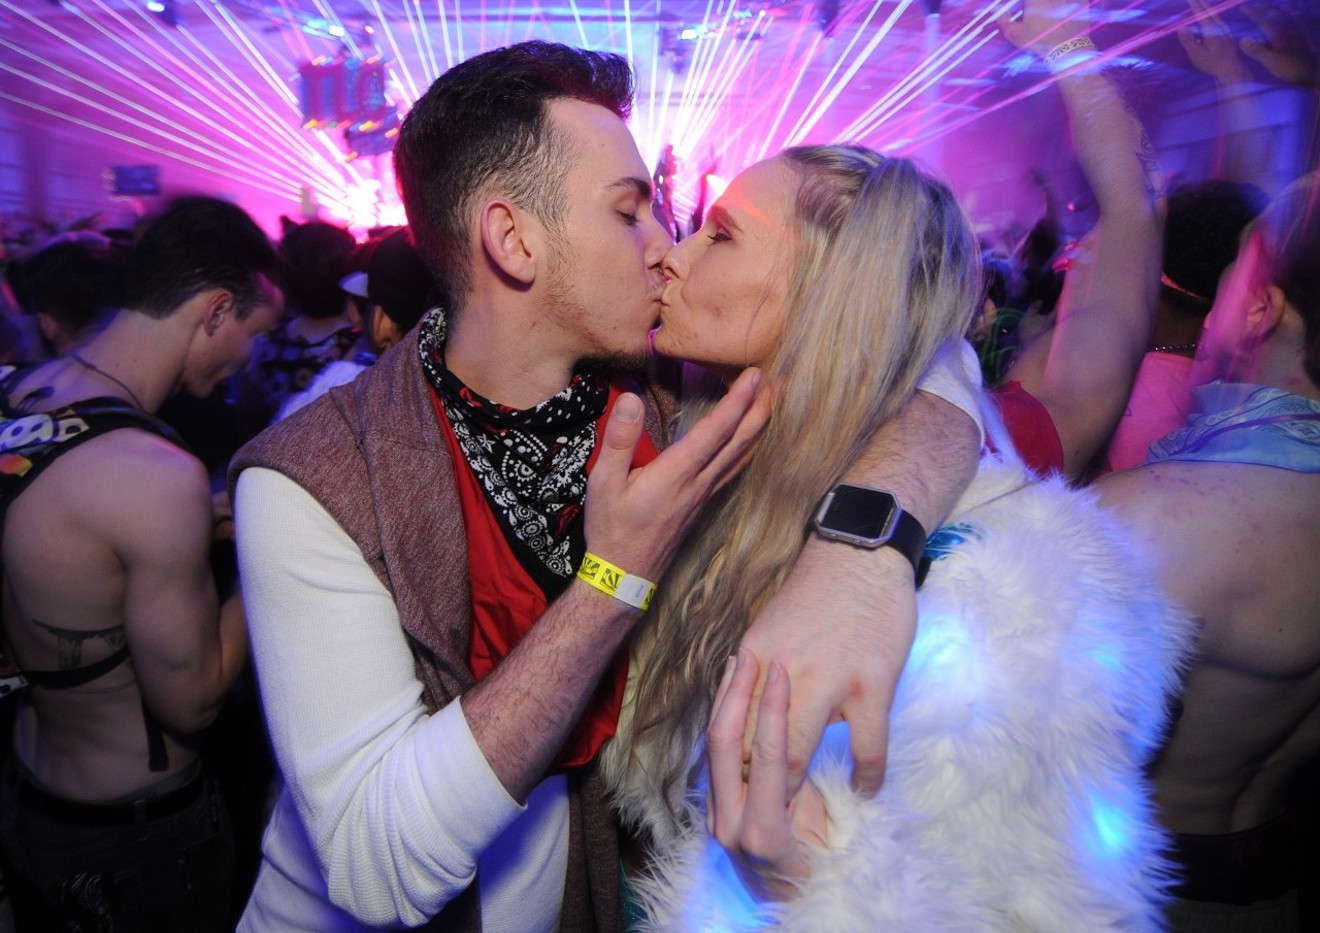 Love is in the air at Crush Arizona.